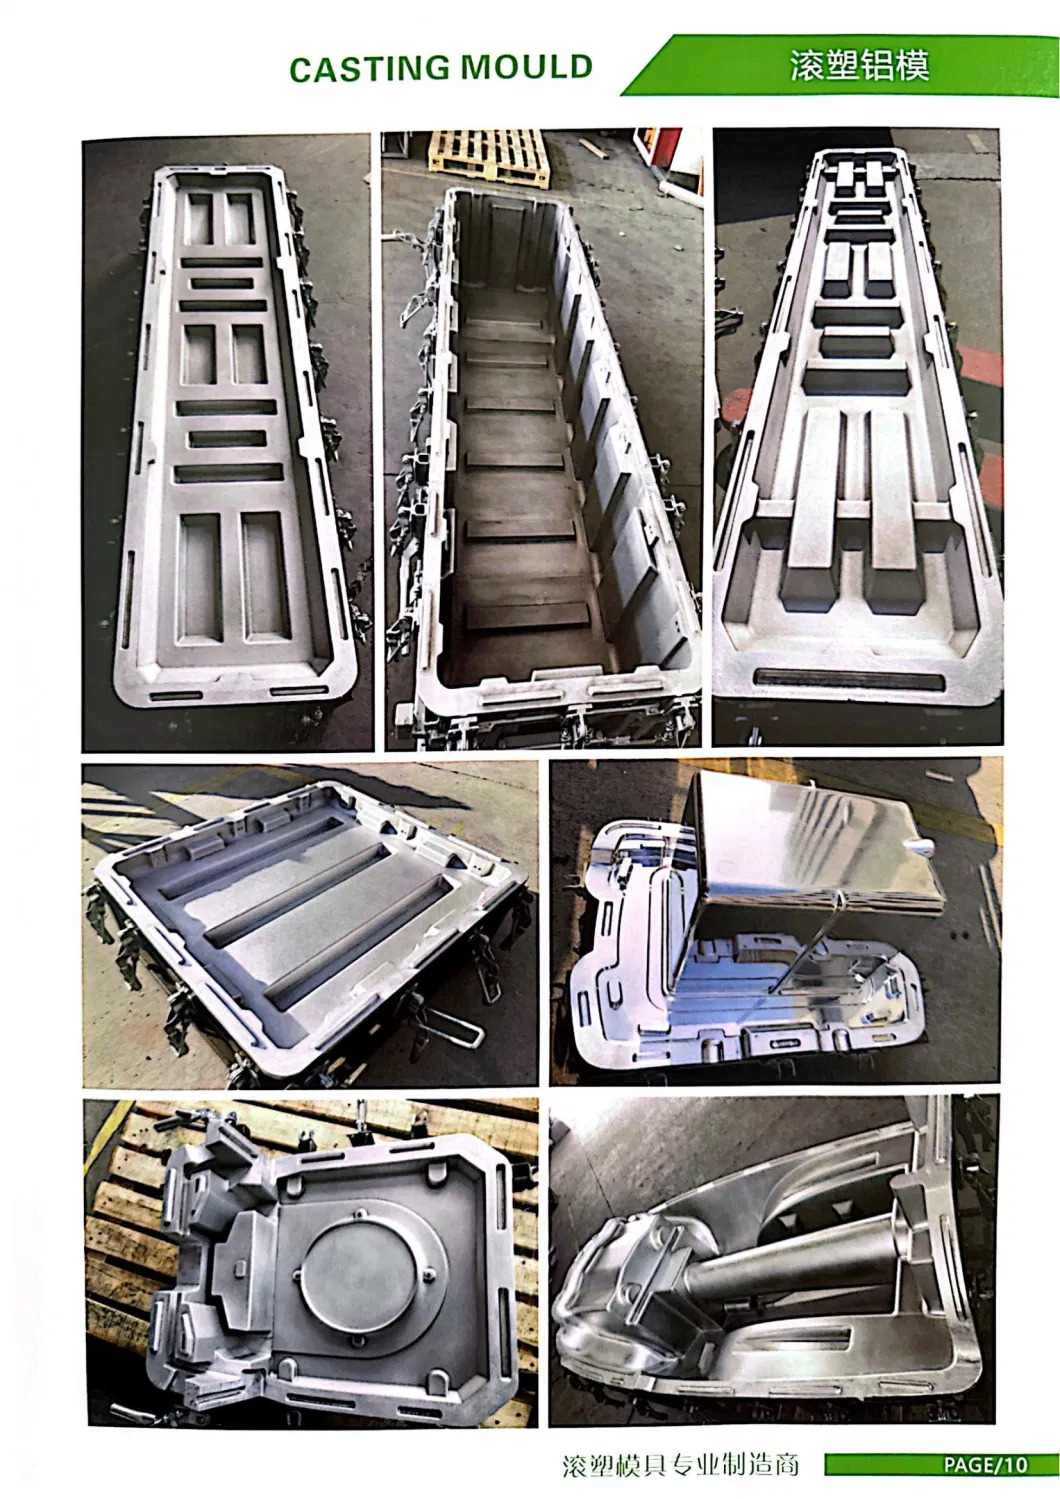 Yi Song Floating Duck Aluminium Mould Casting Process